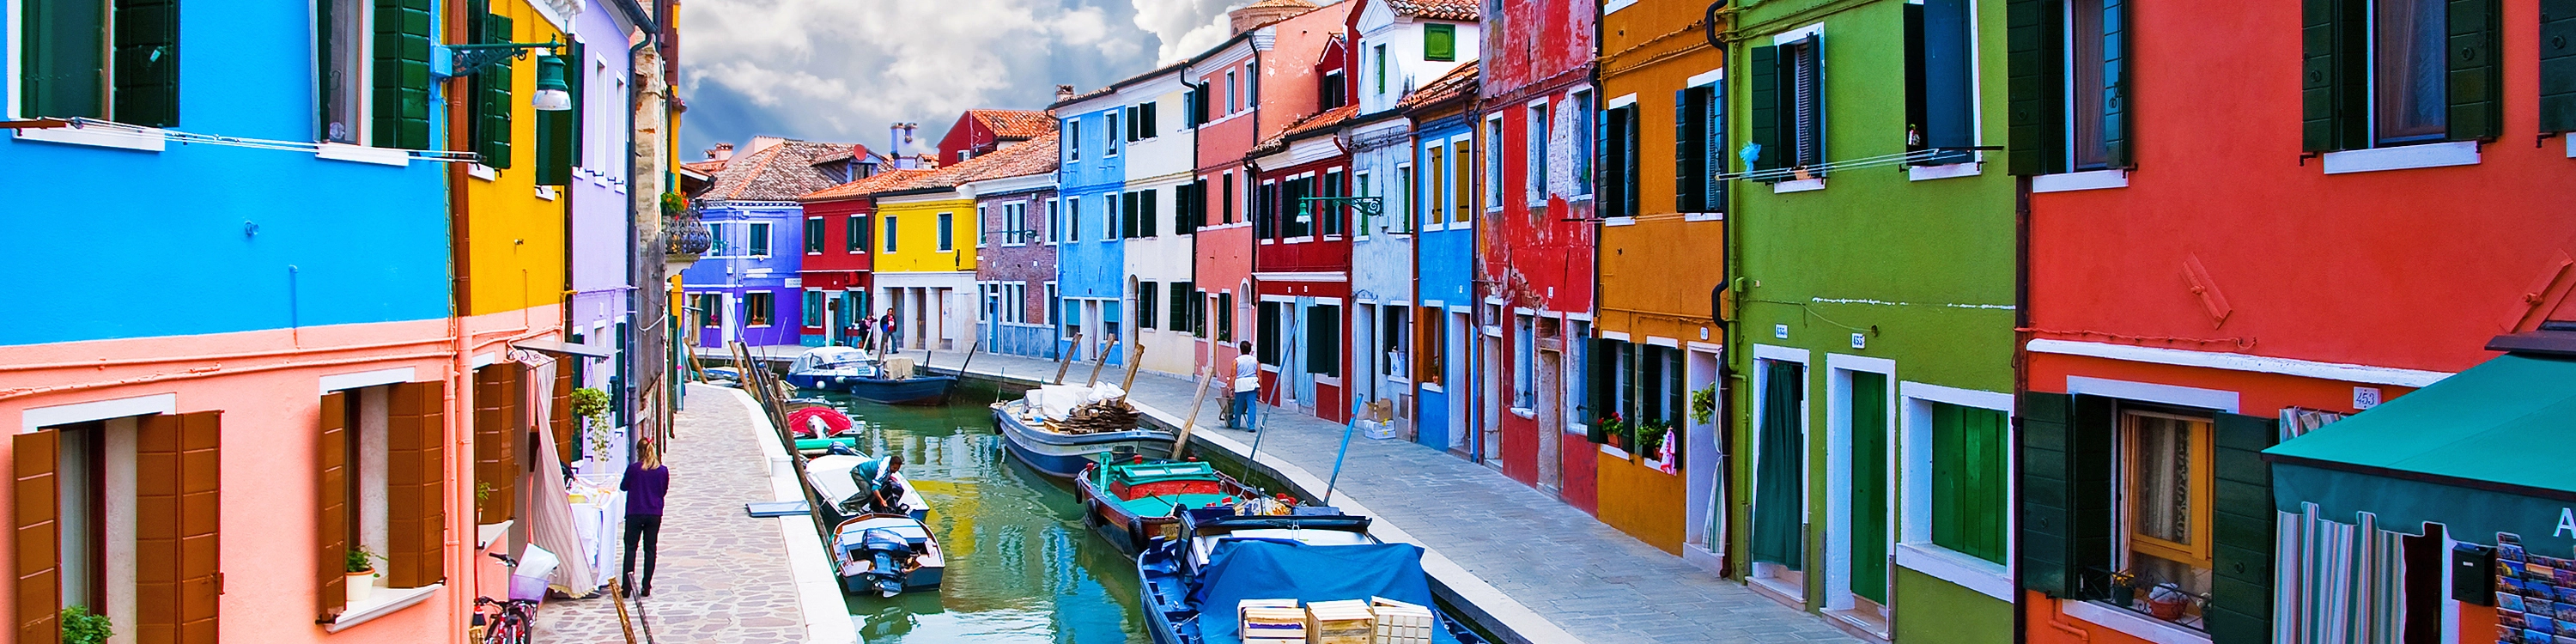 A beautiful view of colorful Murano, the picturesque Venetian island famous for its exquisite glass-making tradition and vibrant canal-side buildings.